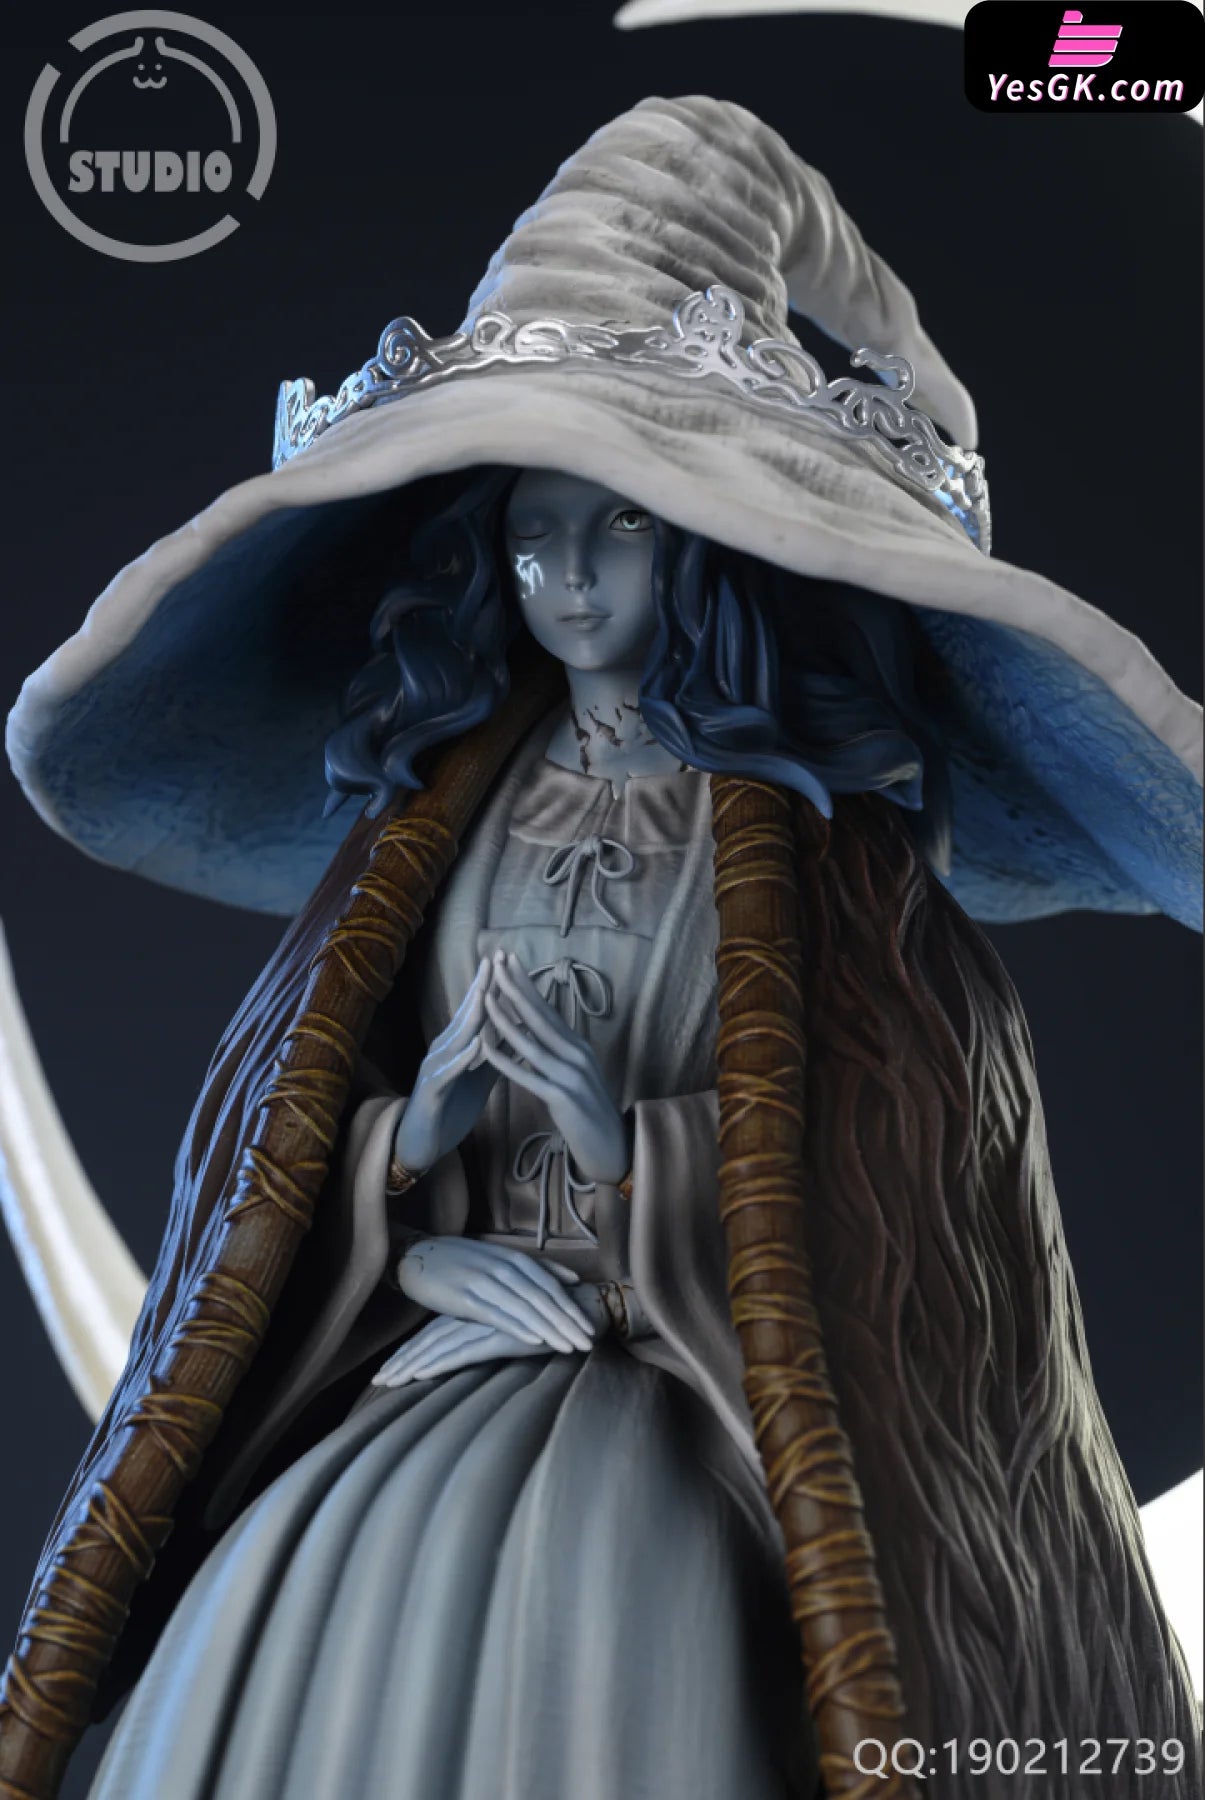 Lunar Princess Ranni Elden Ring Resin Statue by ShowHand Studios - Unboxing  